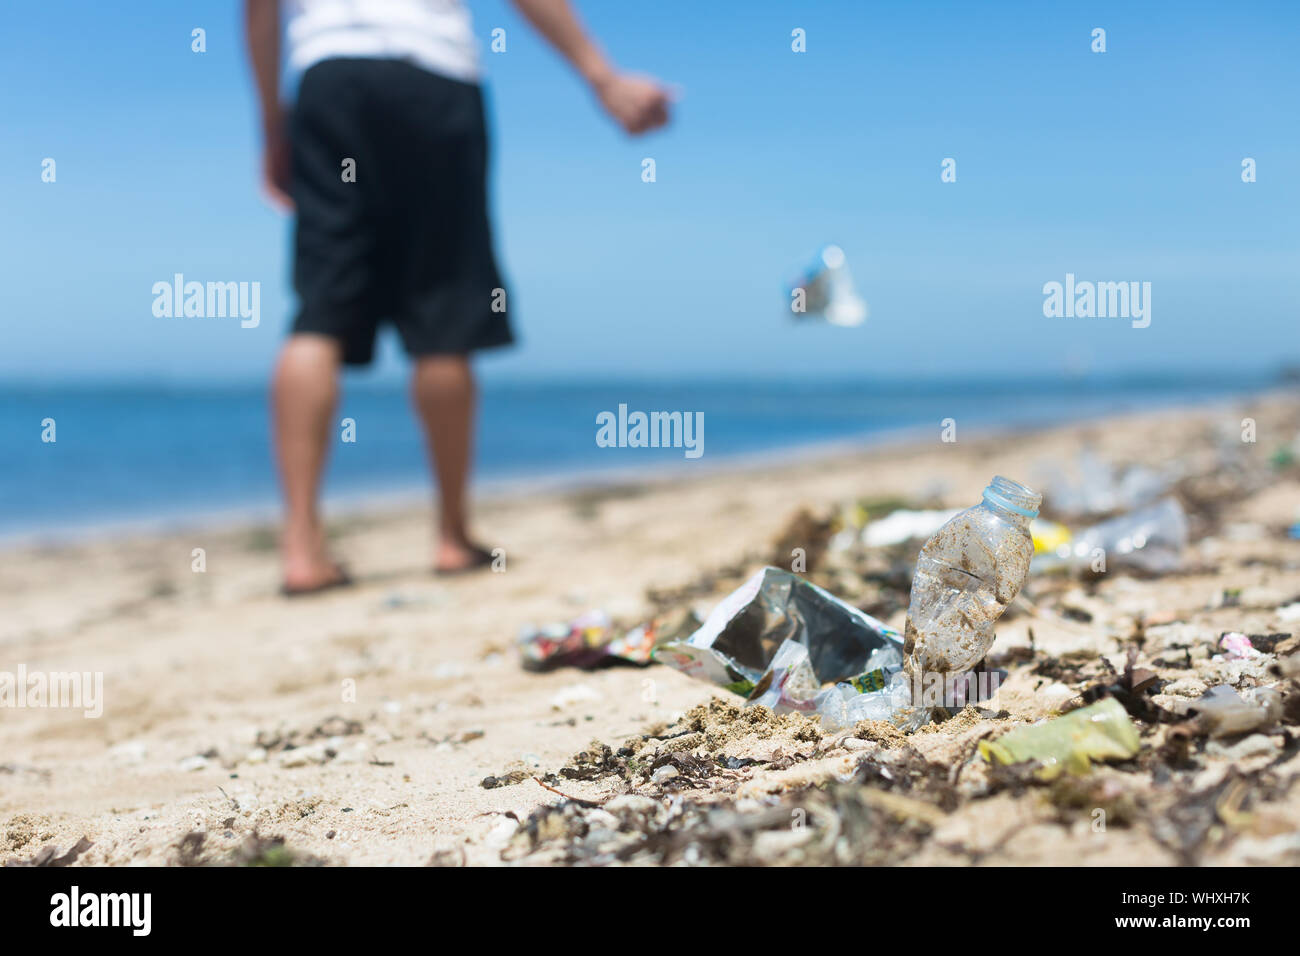 The beach getting destroyed by people littering constantly and ruining the environment Stock Photo